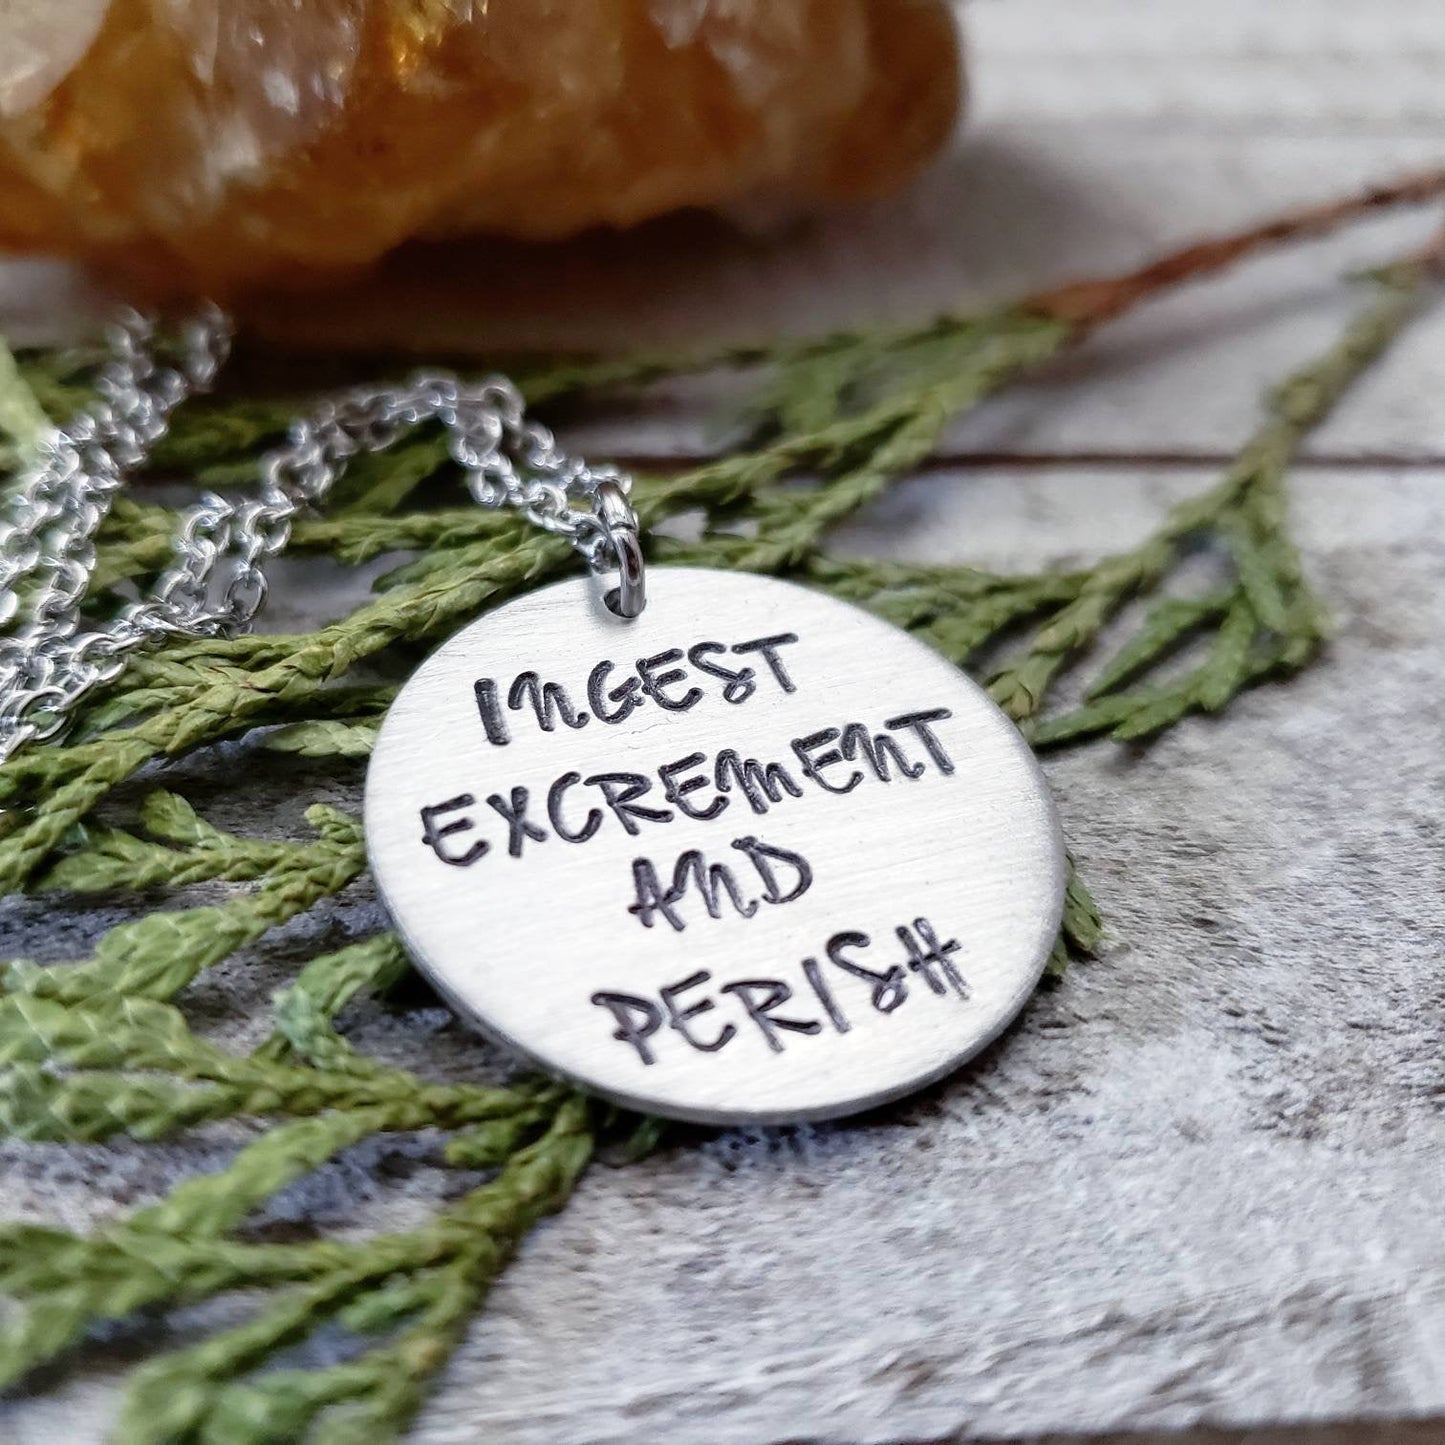 Eat sh*t and die necklace